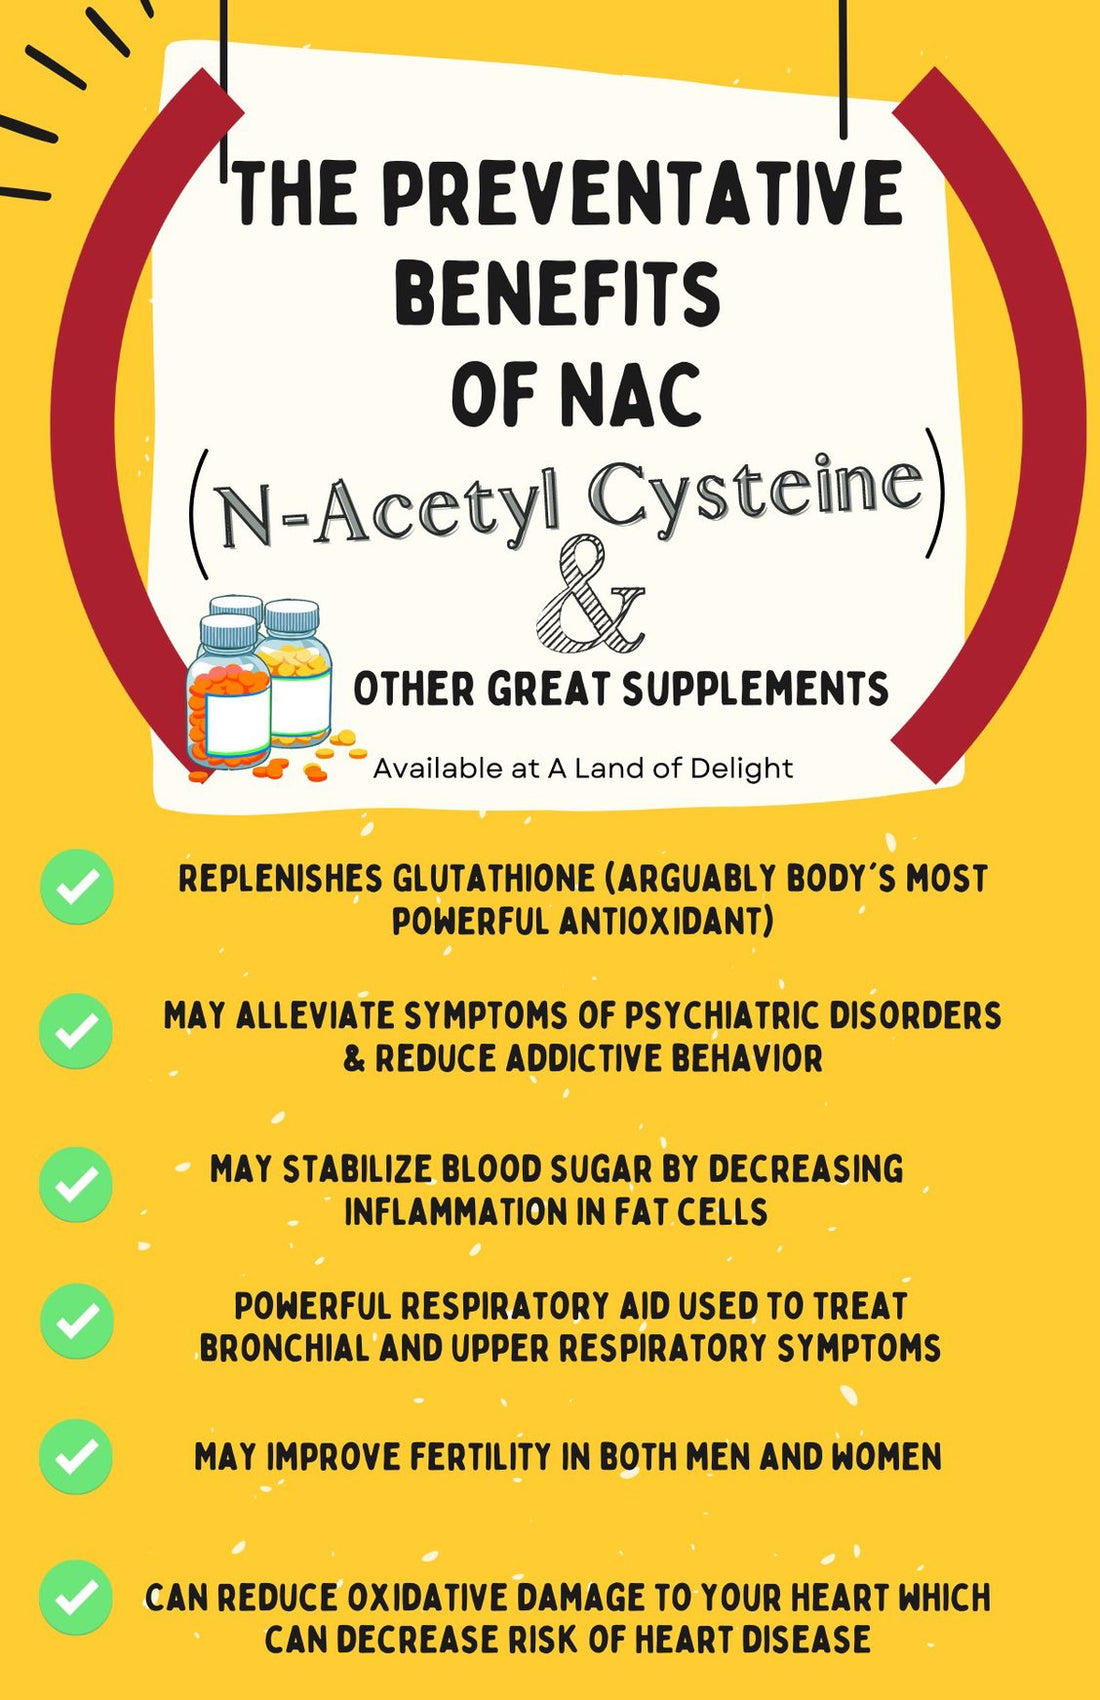 The ABC's of NAC